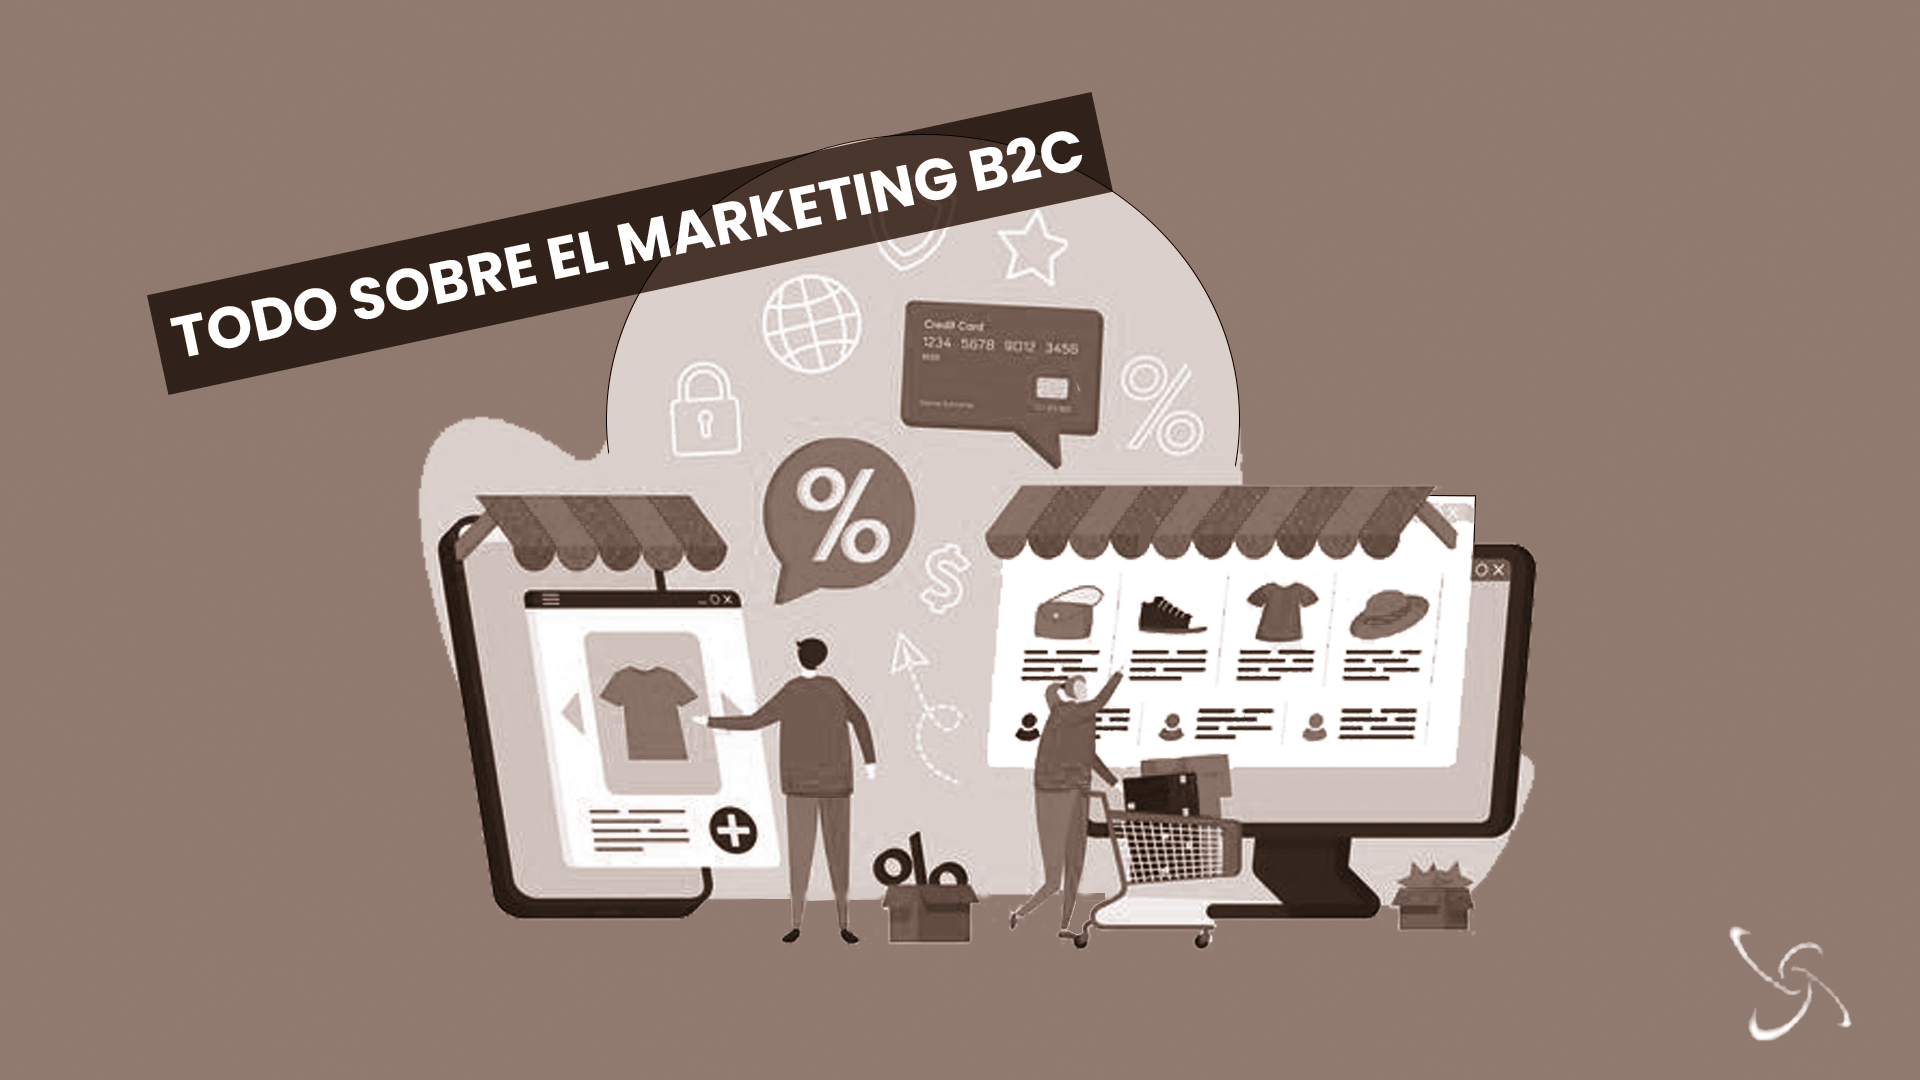 All about B2C Marketing